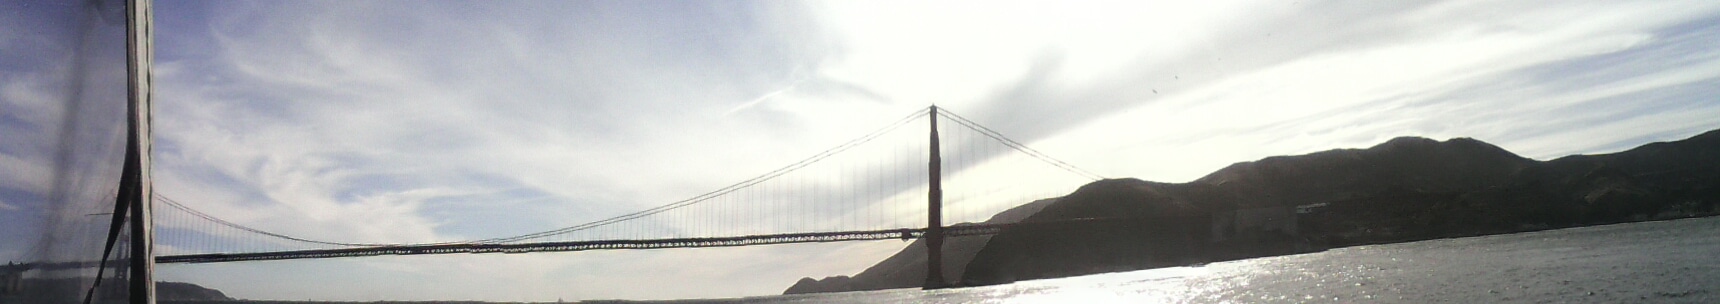 Golden Gate from the boat